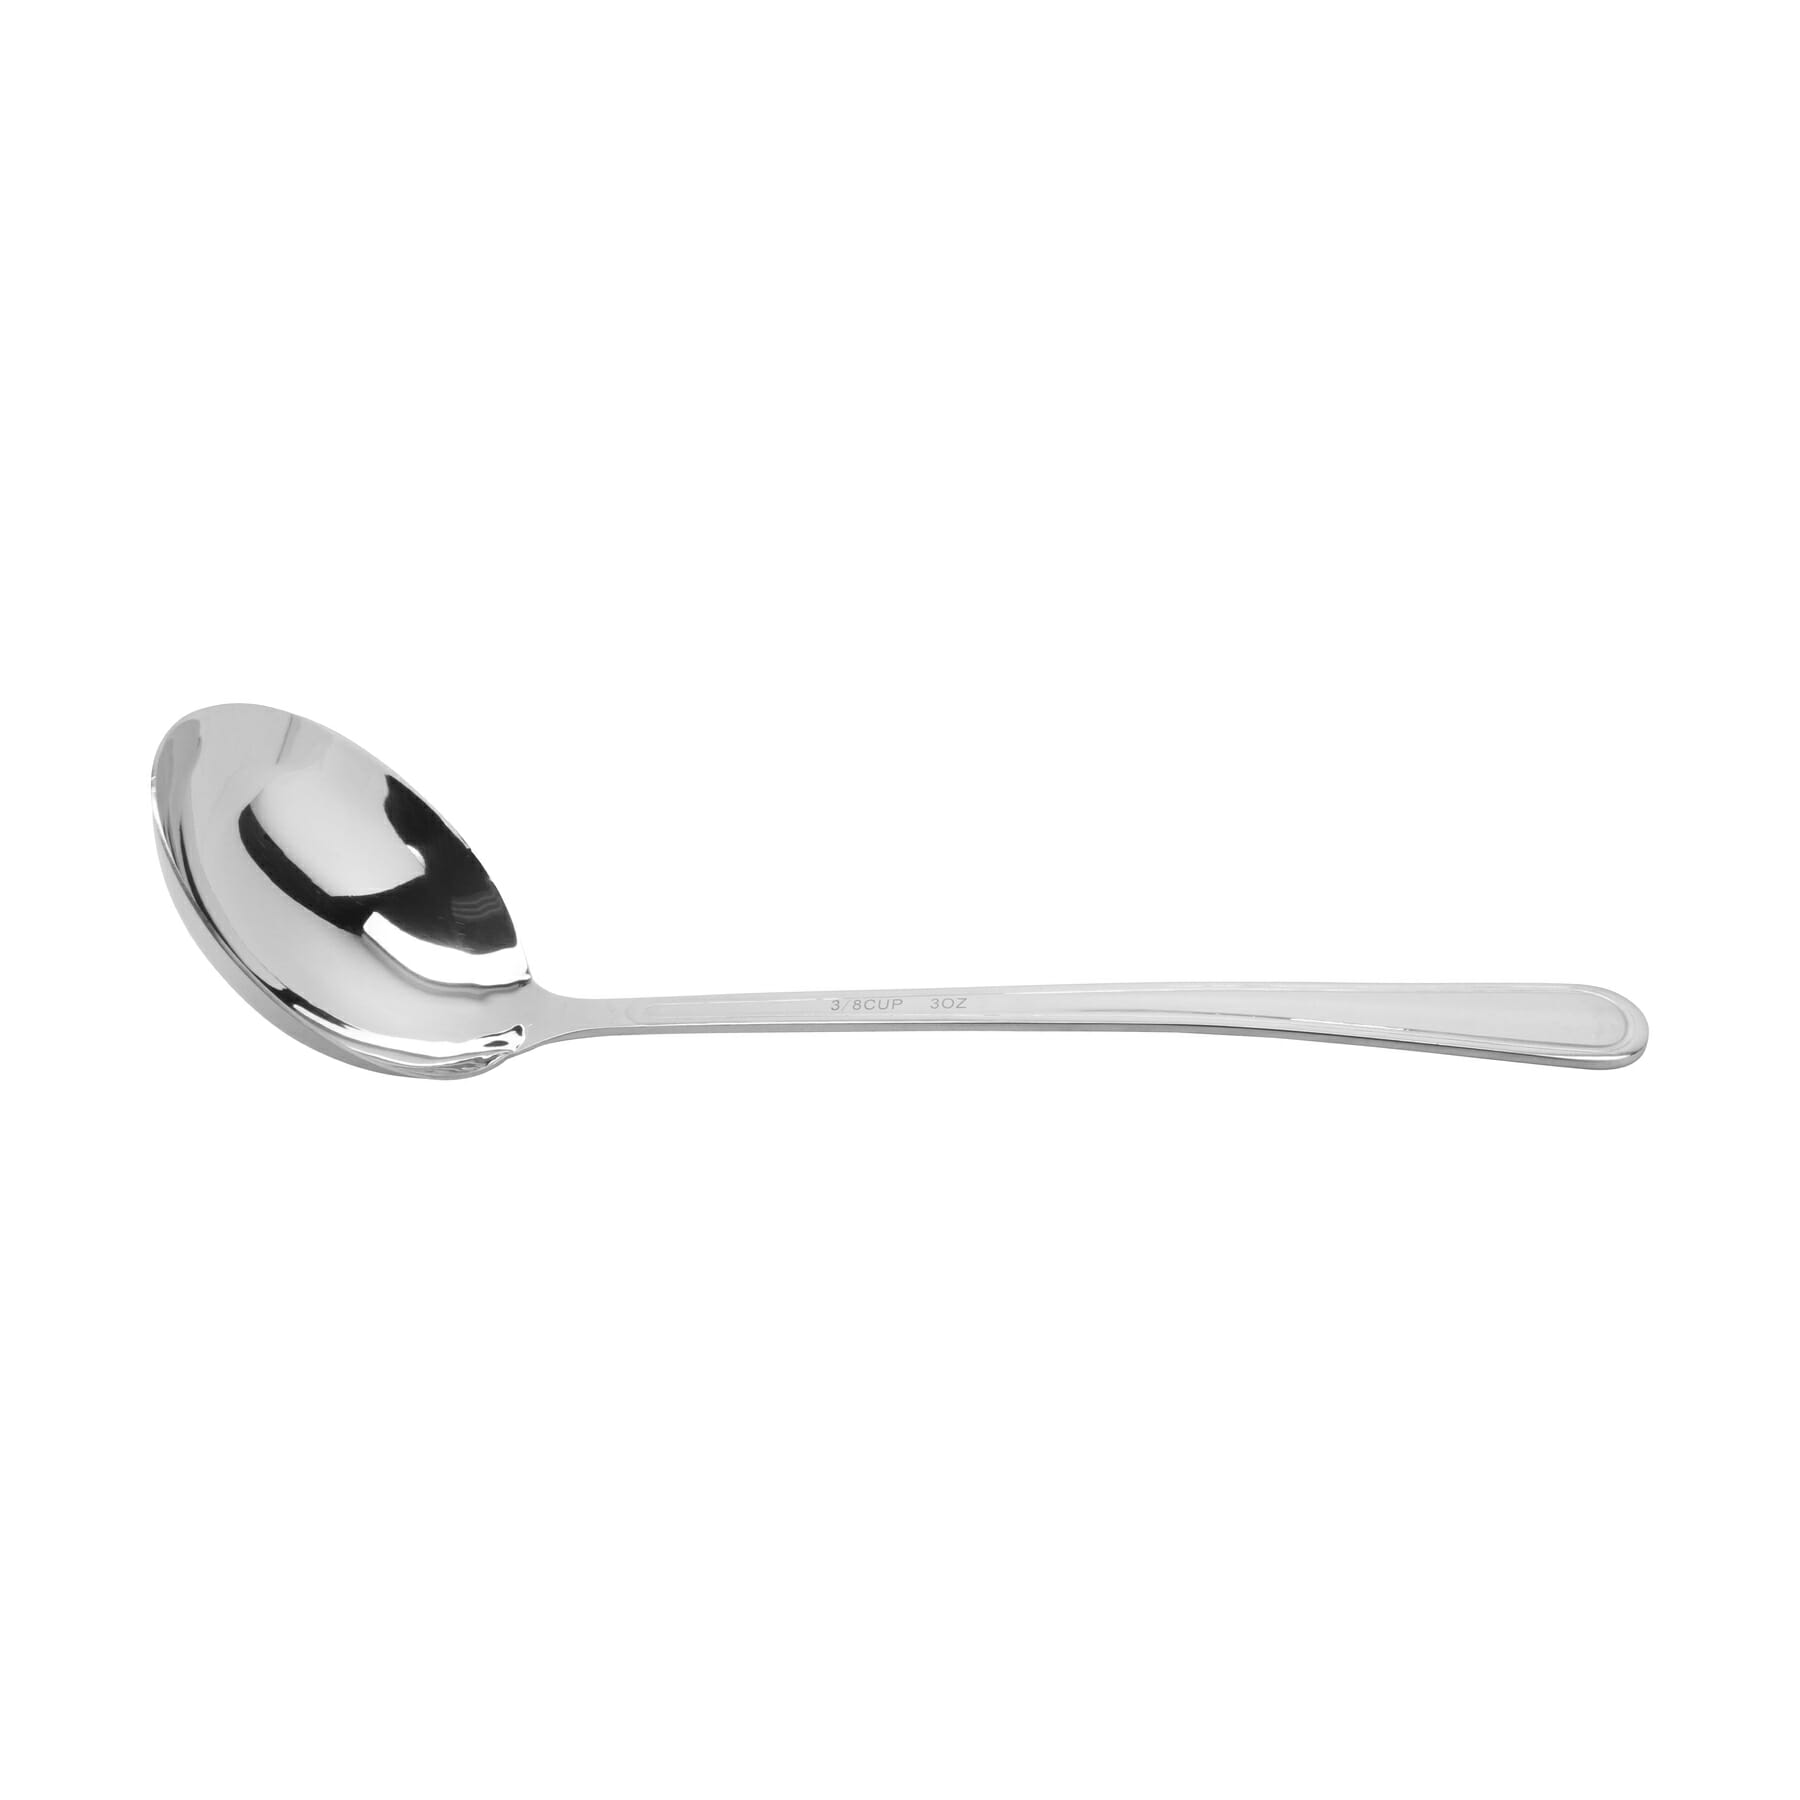 1 oz., 9.5" Stainless Steel Ladle w/ Mirror Finish